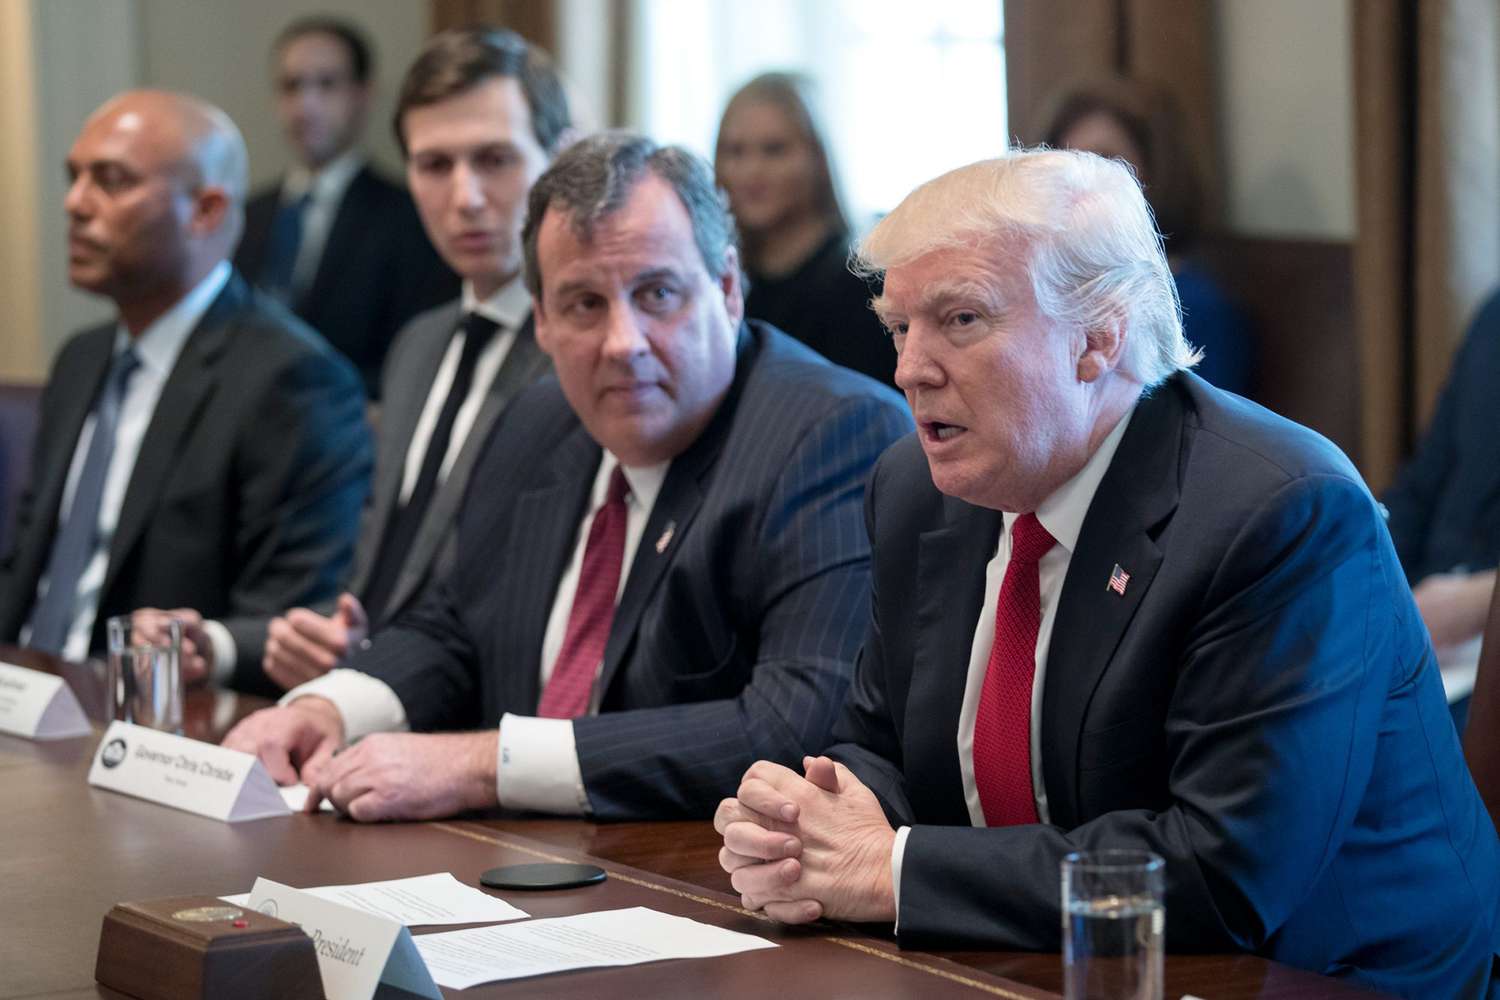 U.S. President Donald Trump (L) and New Jersey Gov. Chris Christie attend a panel discussion on an opioid and drug abuse in the Roosevelt Room of the White House March 29, 2017 in Washington